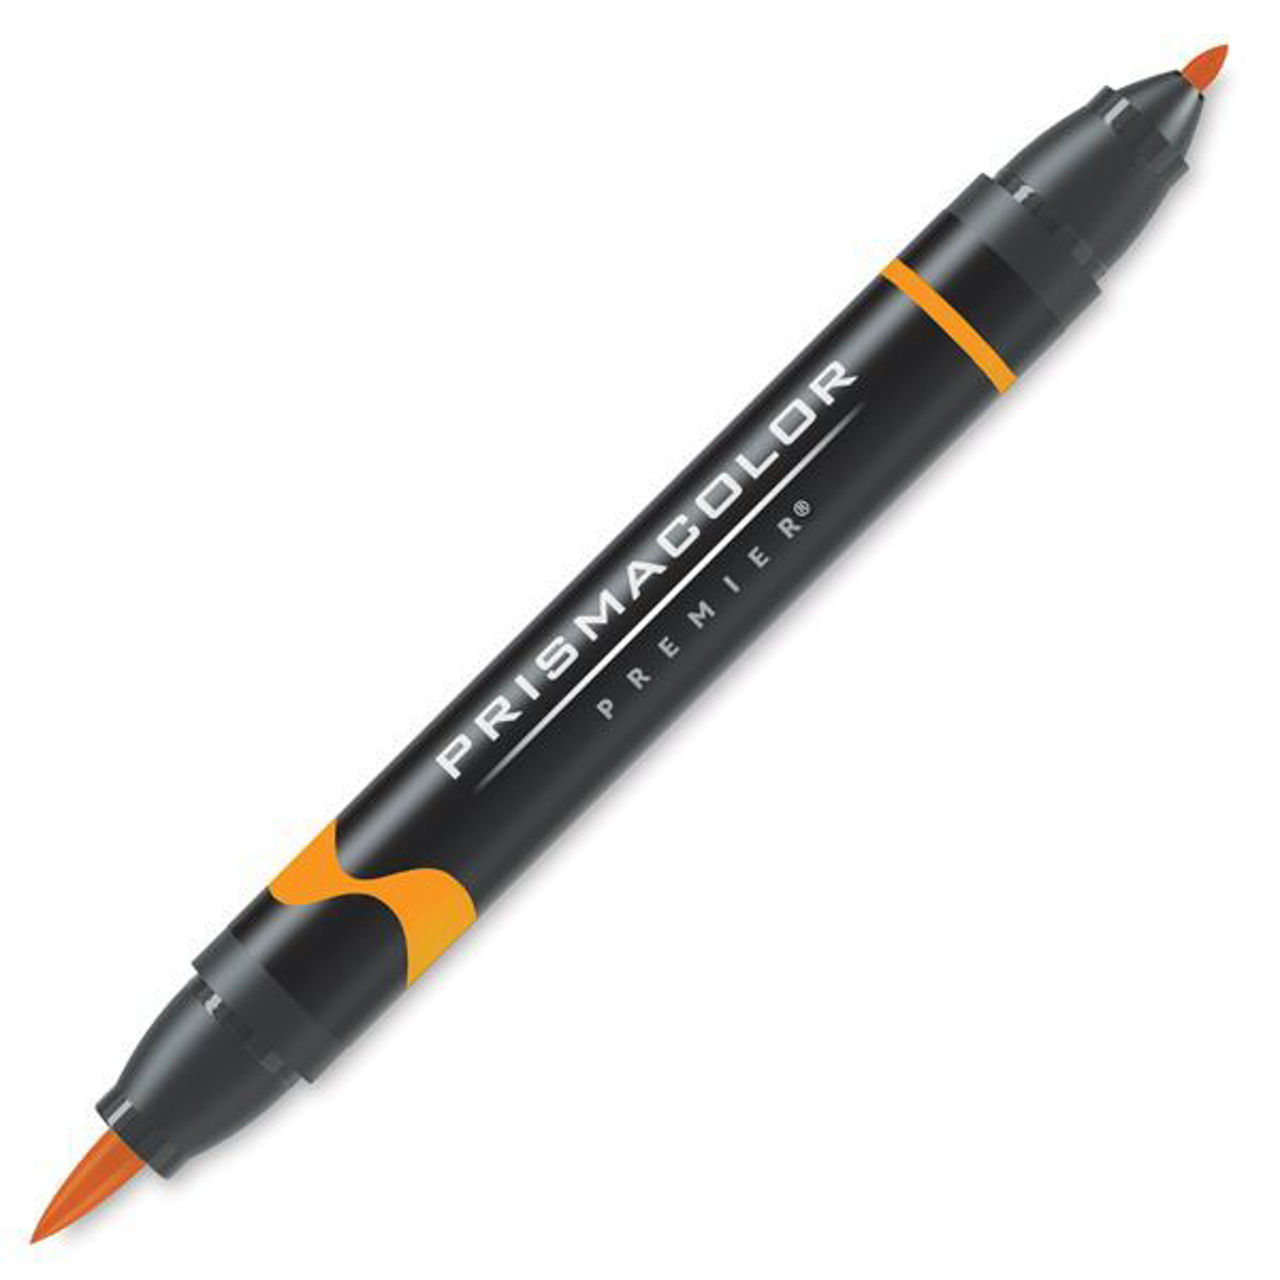 https://carpediemmarkers.com/images/thumbs/0022000_prismacolor-double-ended-brush-markers_1280.jpeg